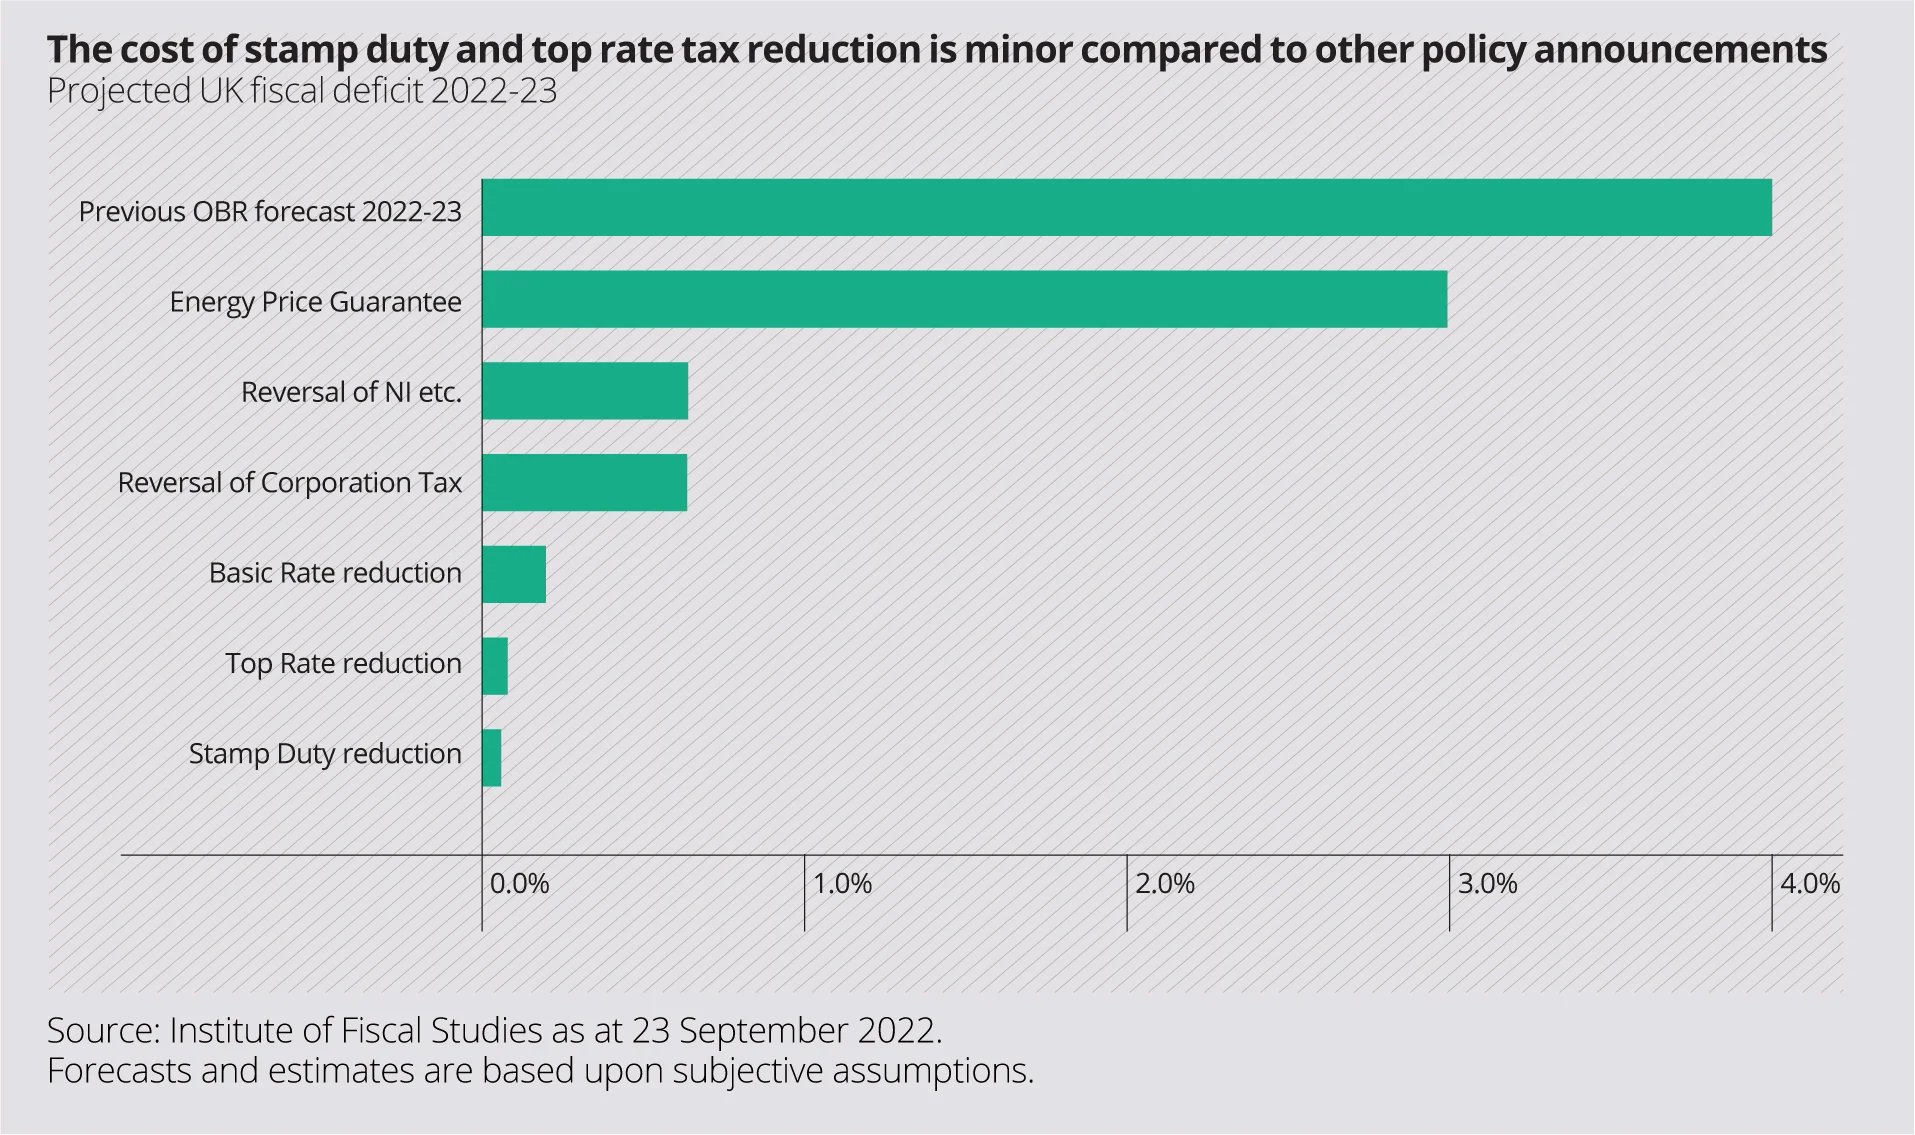 The cost of stamp duty and top rate tax reduction is minor compared to other policy announcements